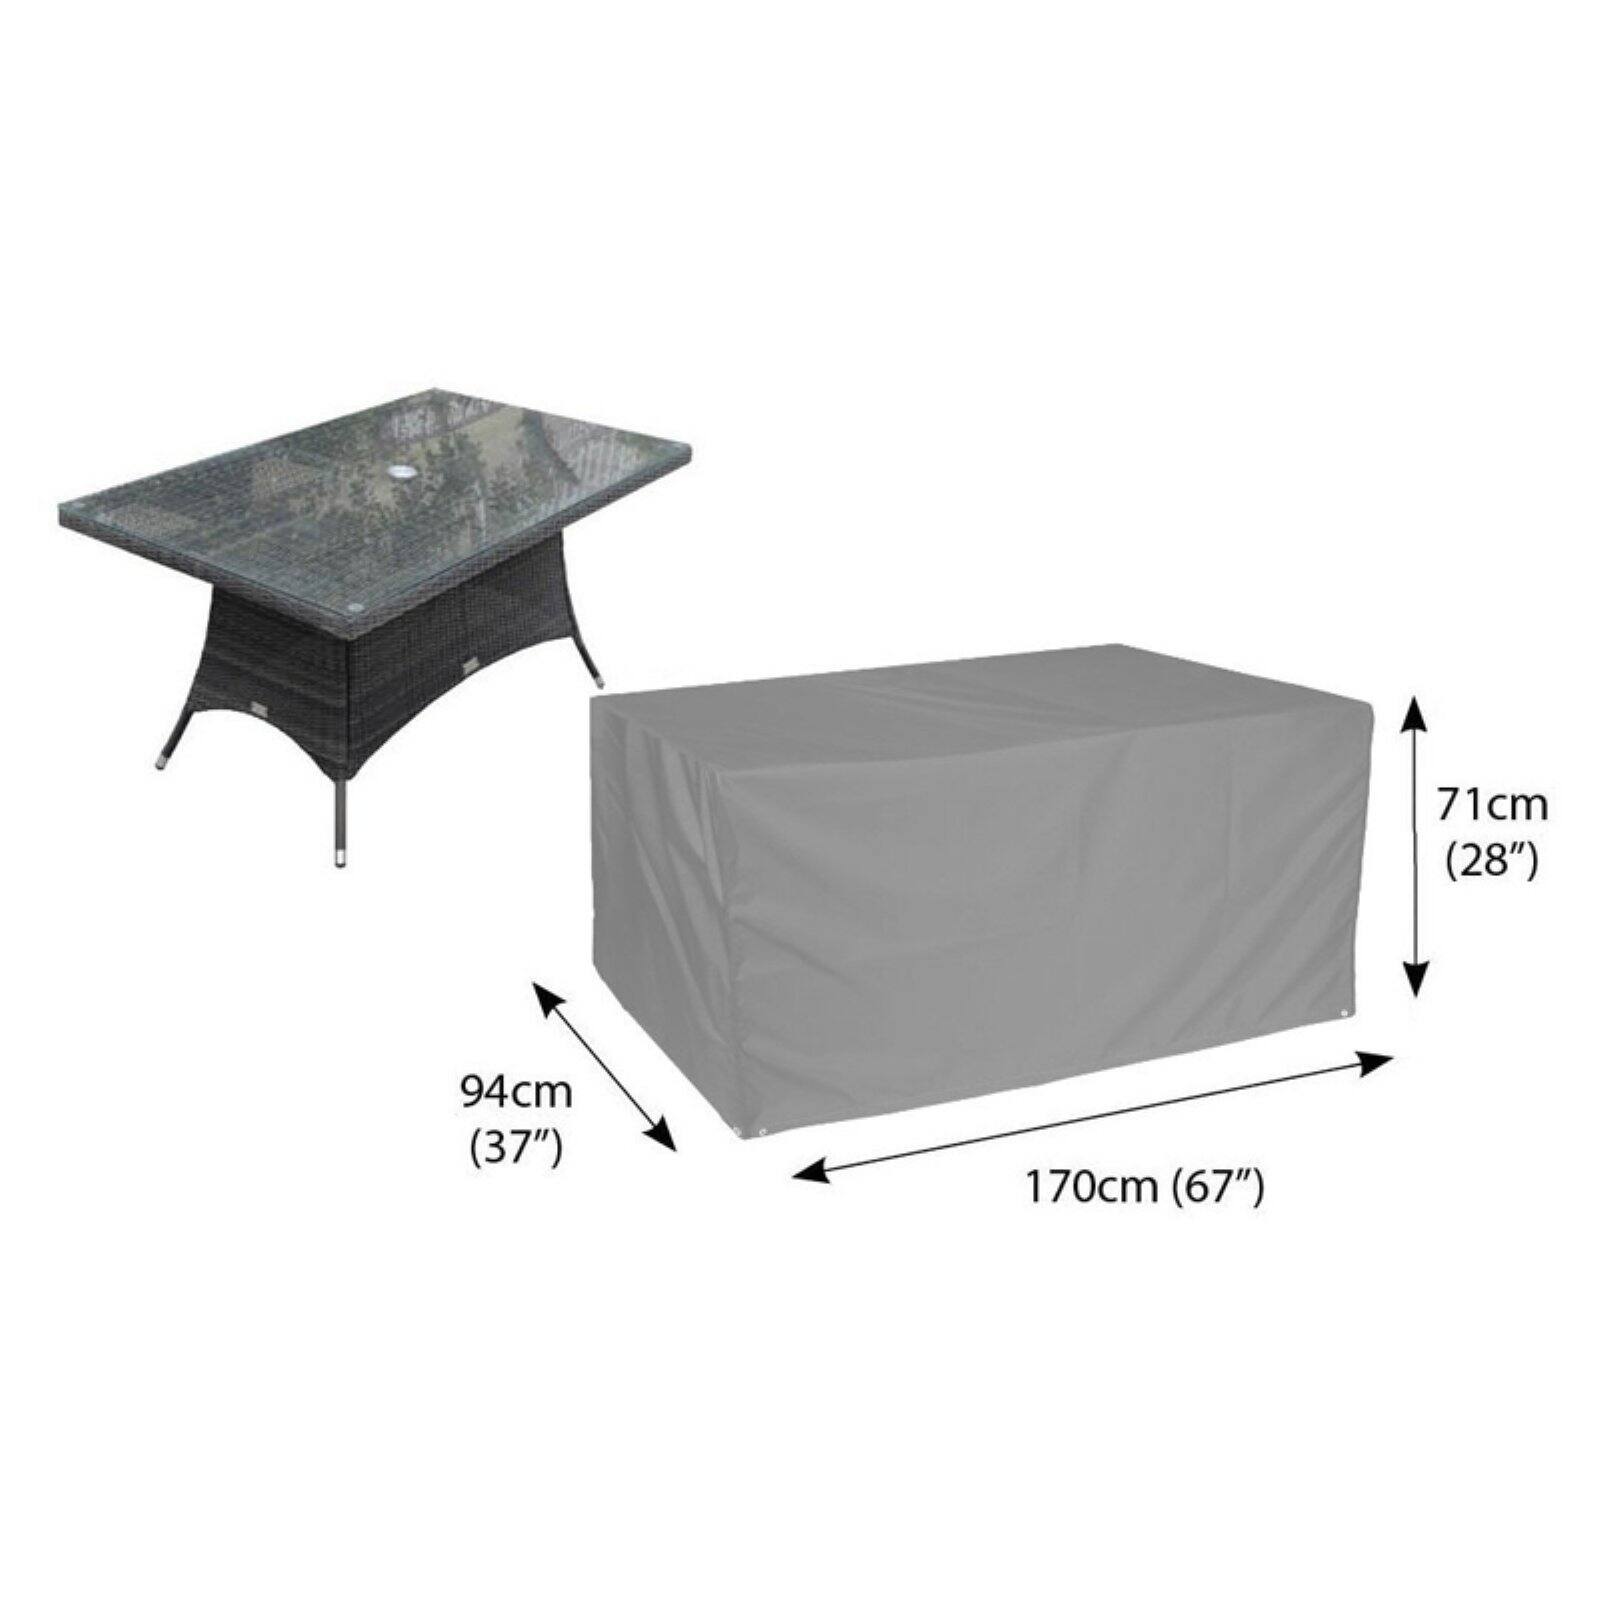 Bosmere Waterproof Grey Cover for 67 in. Rectangular Table - 67L x 37W x 28H in. - image 4 of 4